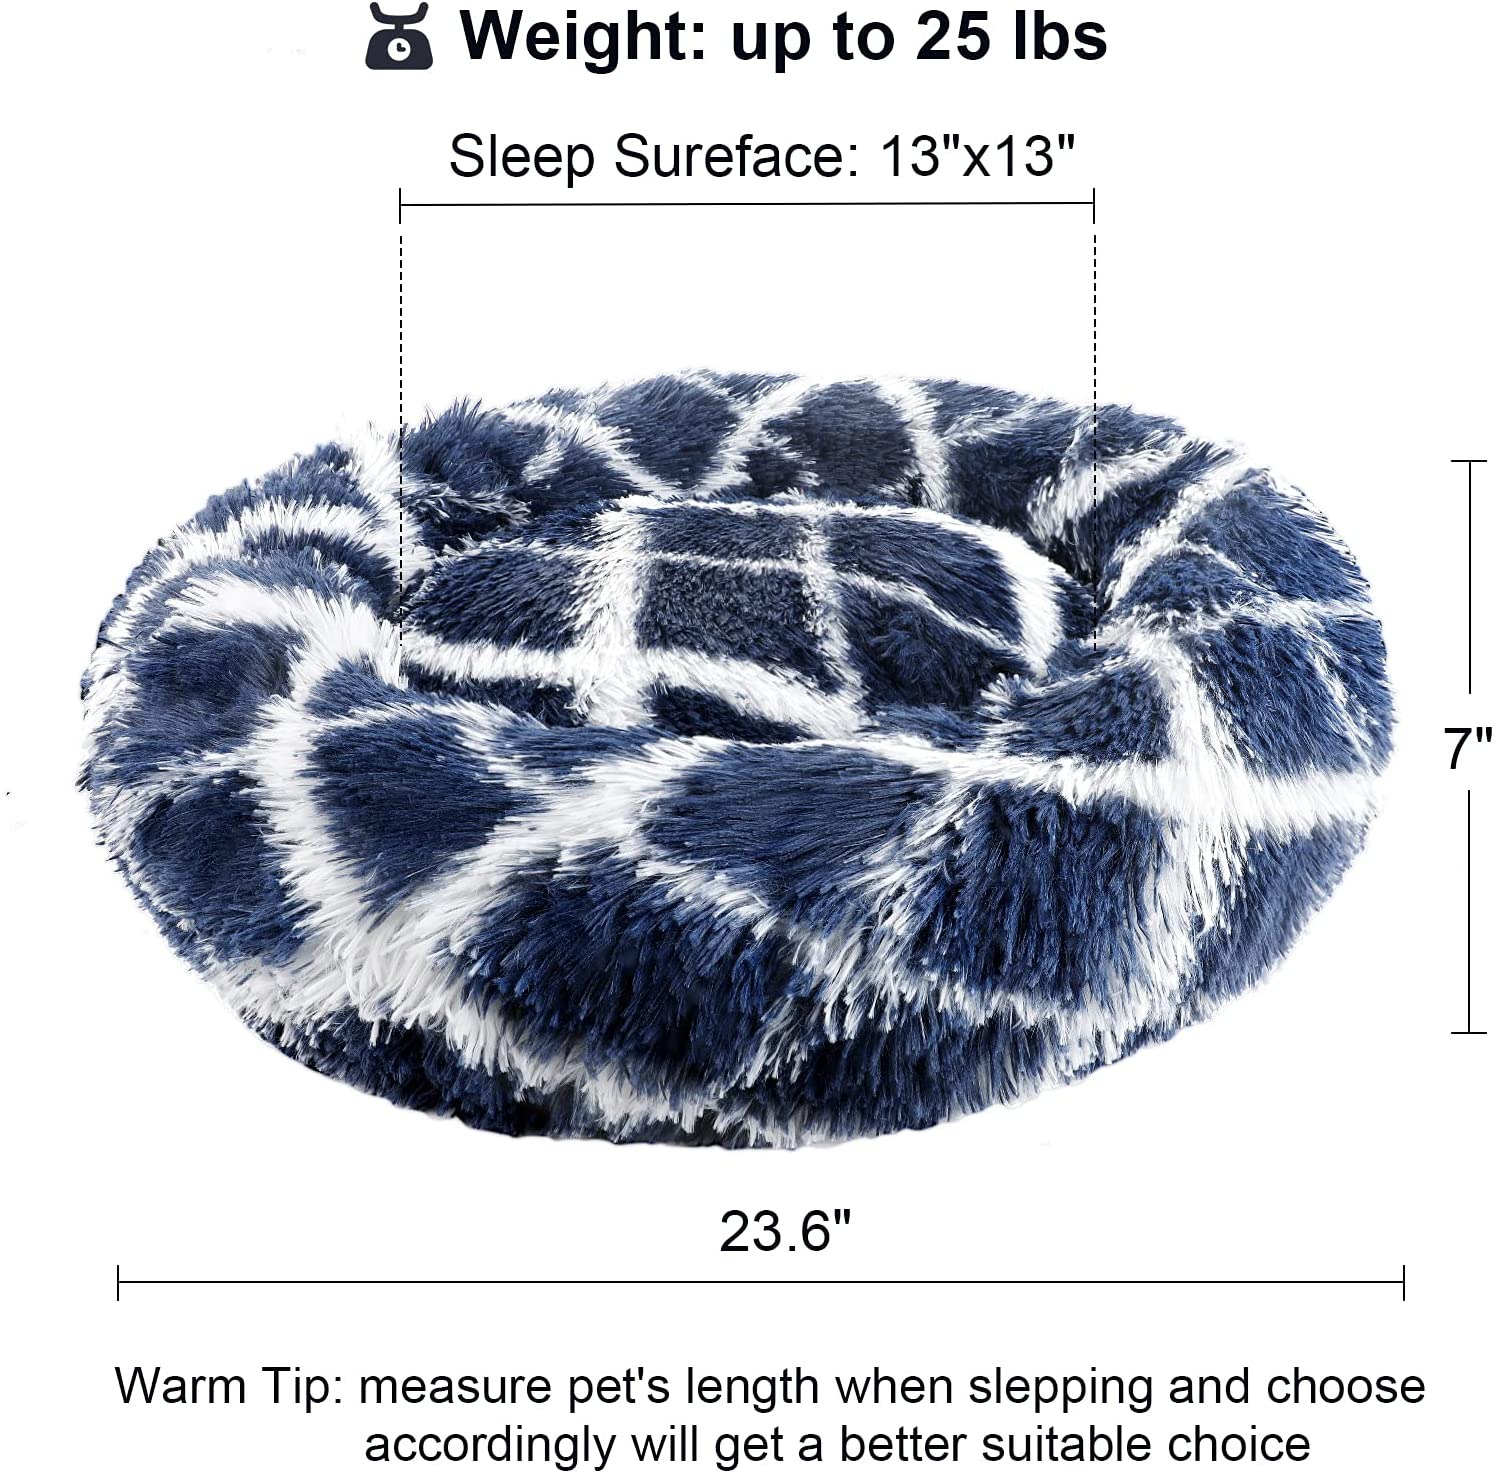 FOYOPET Calming Cat Bed for Indoor Cats, 23.6" Donut round Dog Bed for Small Dogs up to 25Lbs, Anti-Anxiety Self-Warming Cozy Soft Plush Pet Beds, Washable Puppy Sofa Bed with Removable Inner Cushion